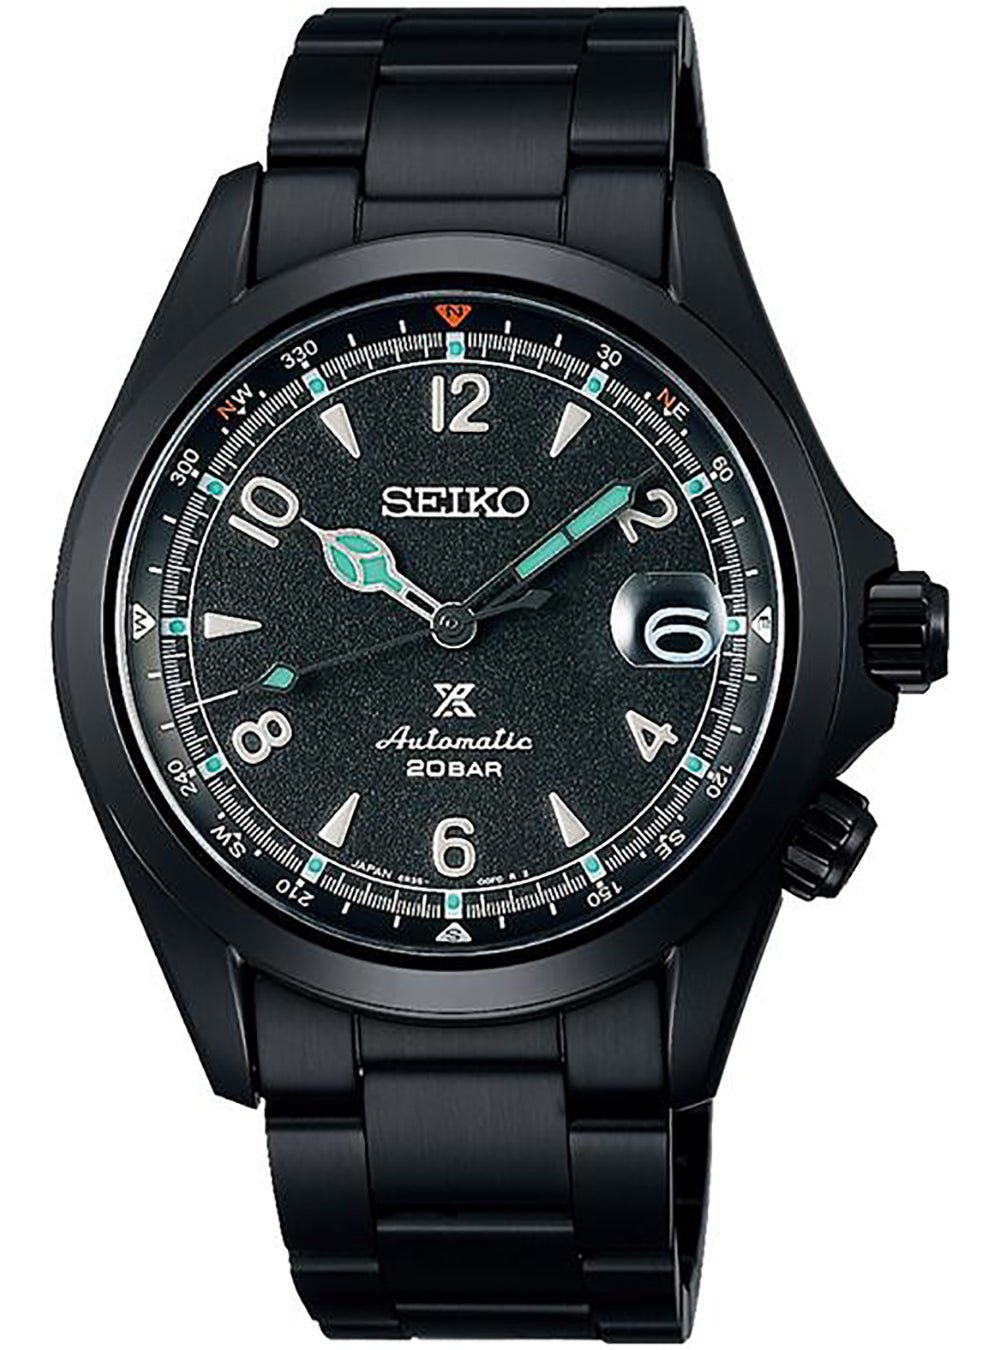 SEIKO PROSPEX ALPINIST THE BLACK SERIES LIMITED EDITION SBDC185 MADE IN JAPAN JDMWRISTWATCHjapan-select